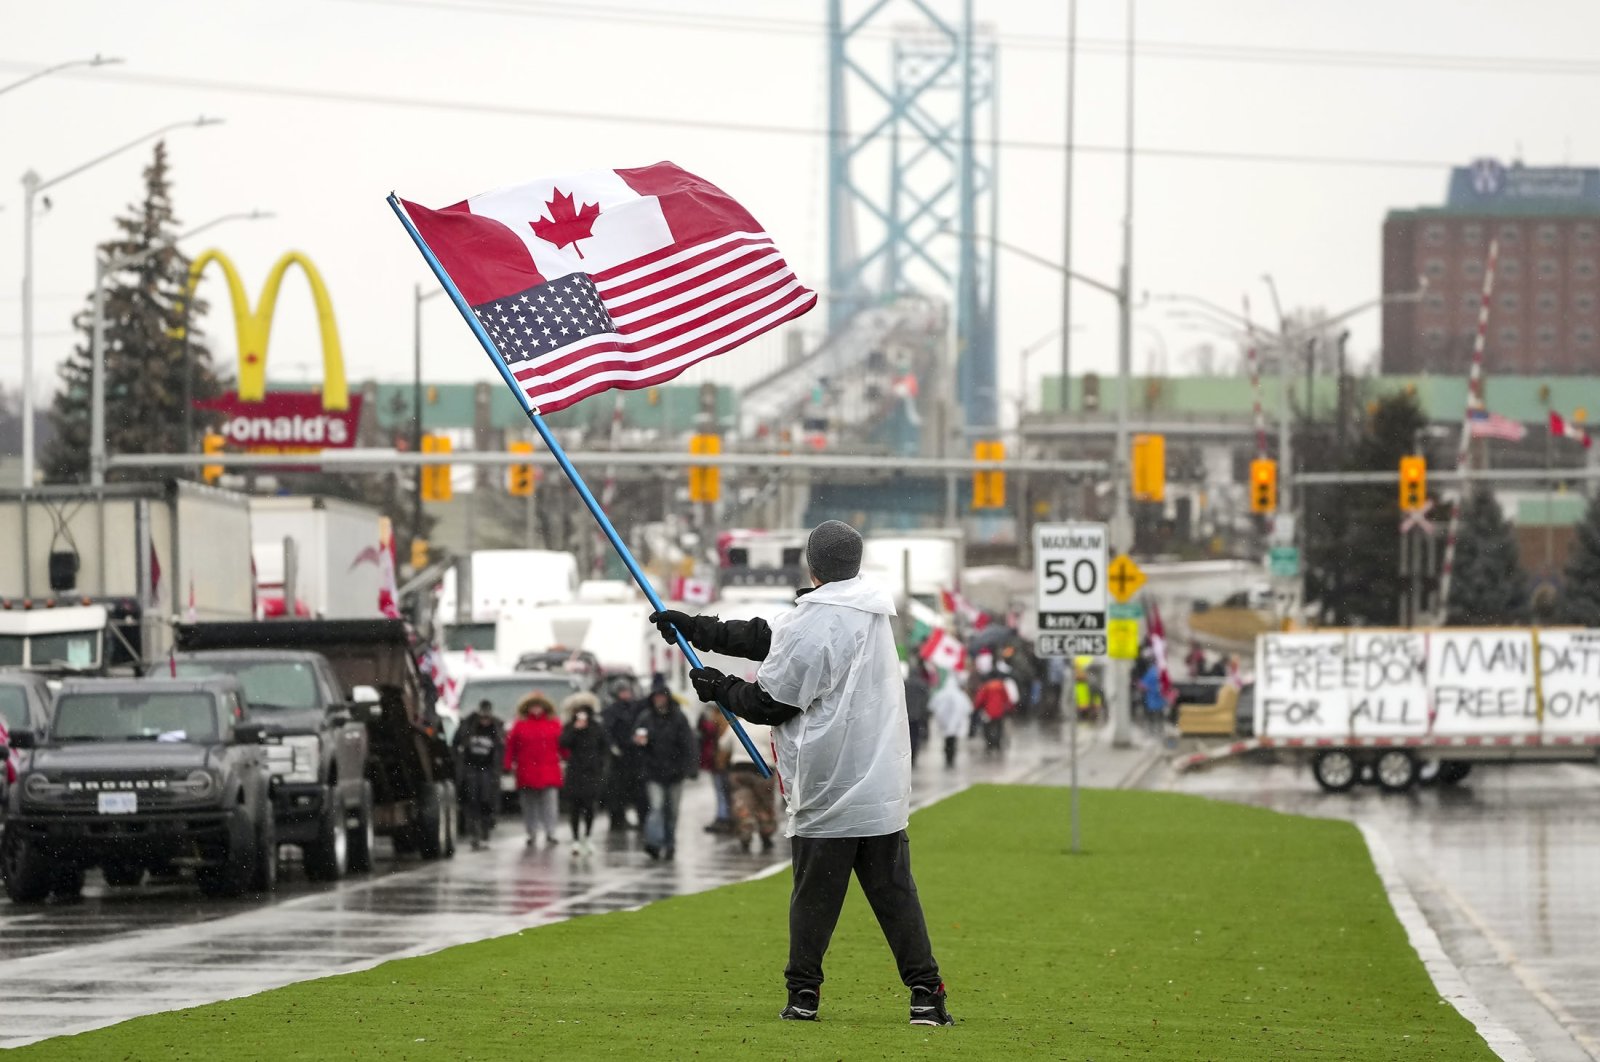 A man waves a Canadian and American flag as truckers and supporters block the access leading from the Ambassador Bridge, linking Detroit and Windsor, in Windsor, Ontario, Canada, Feb. 11, 2022. (AP Photo)